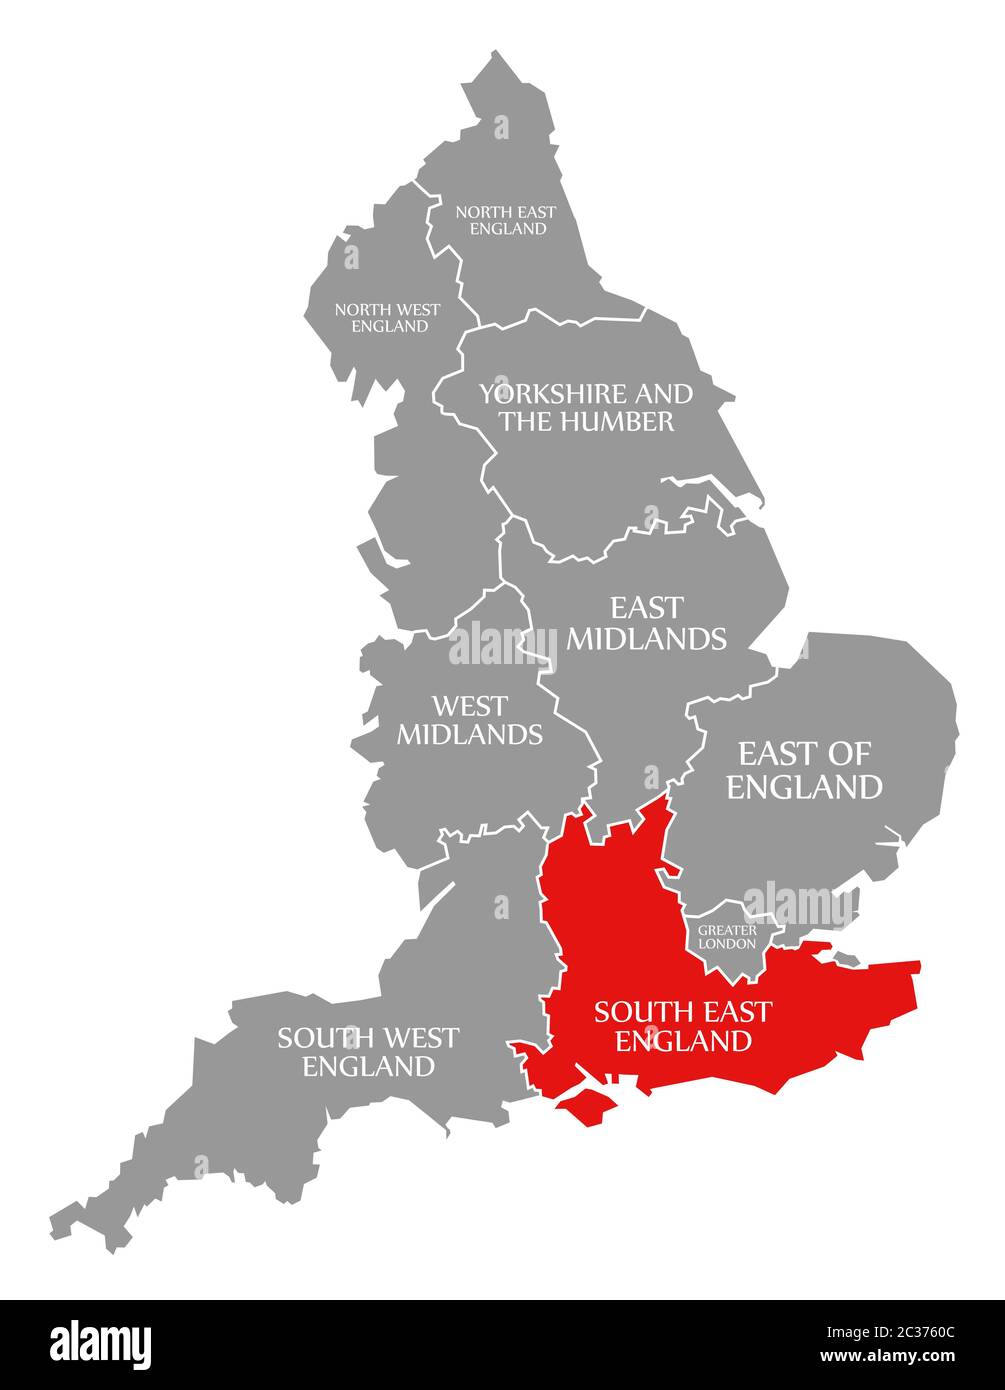 South East England red highlighted in map of England UK Stock Photo